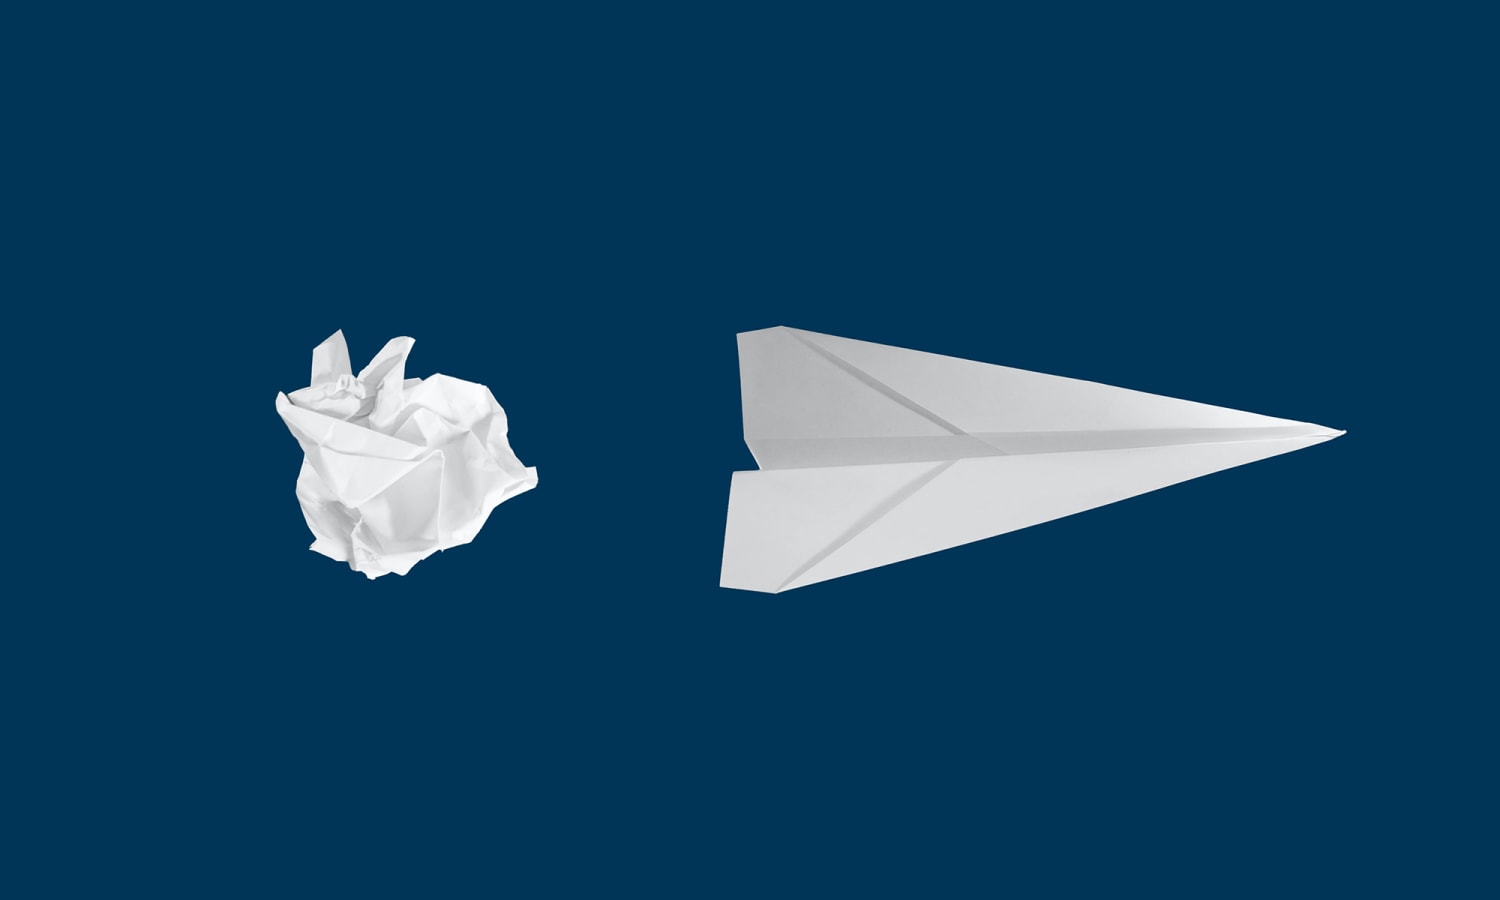 Lo anterior Ya que Audaz Types of Paper Planes and how to fold them